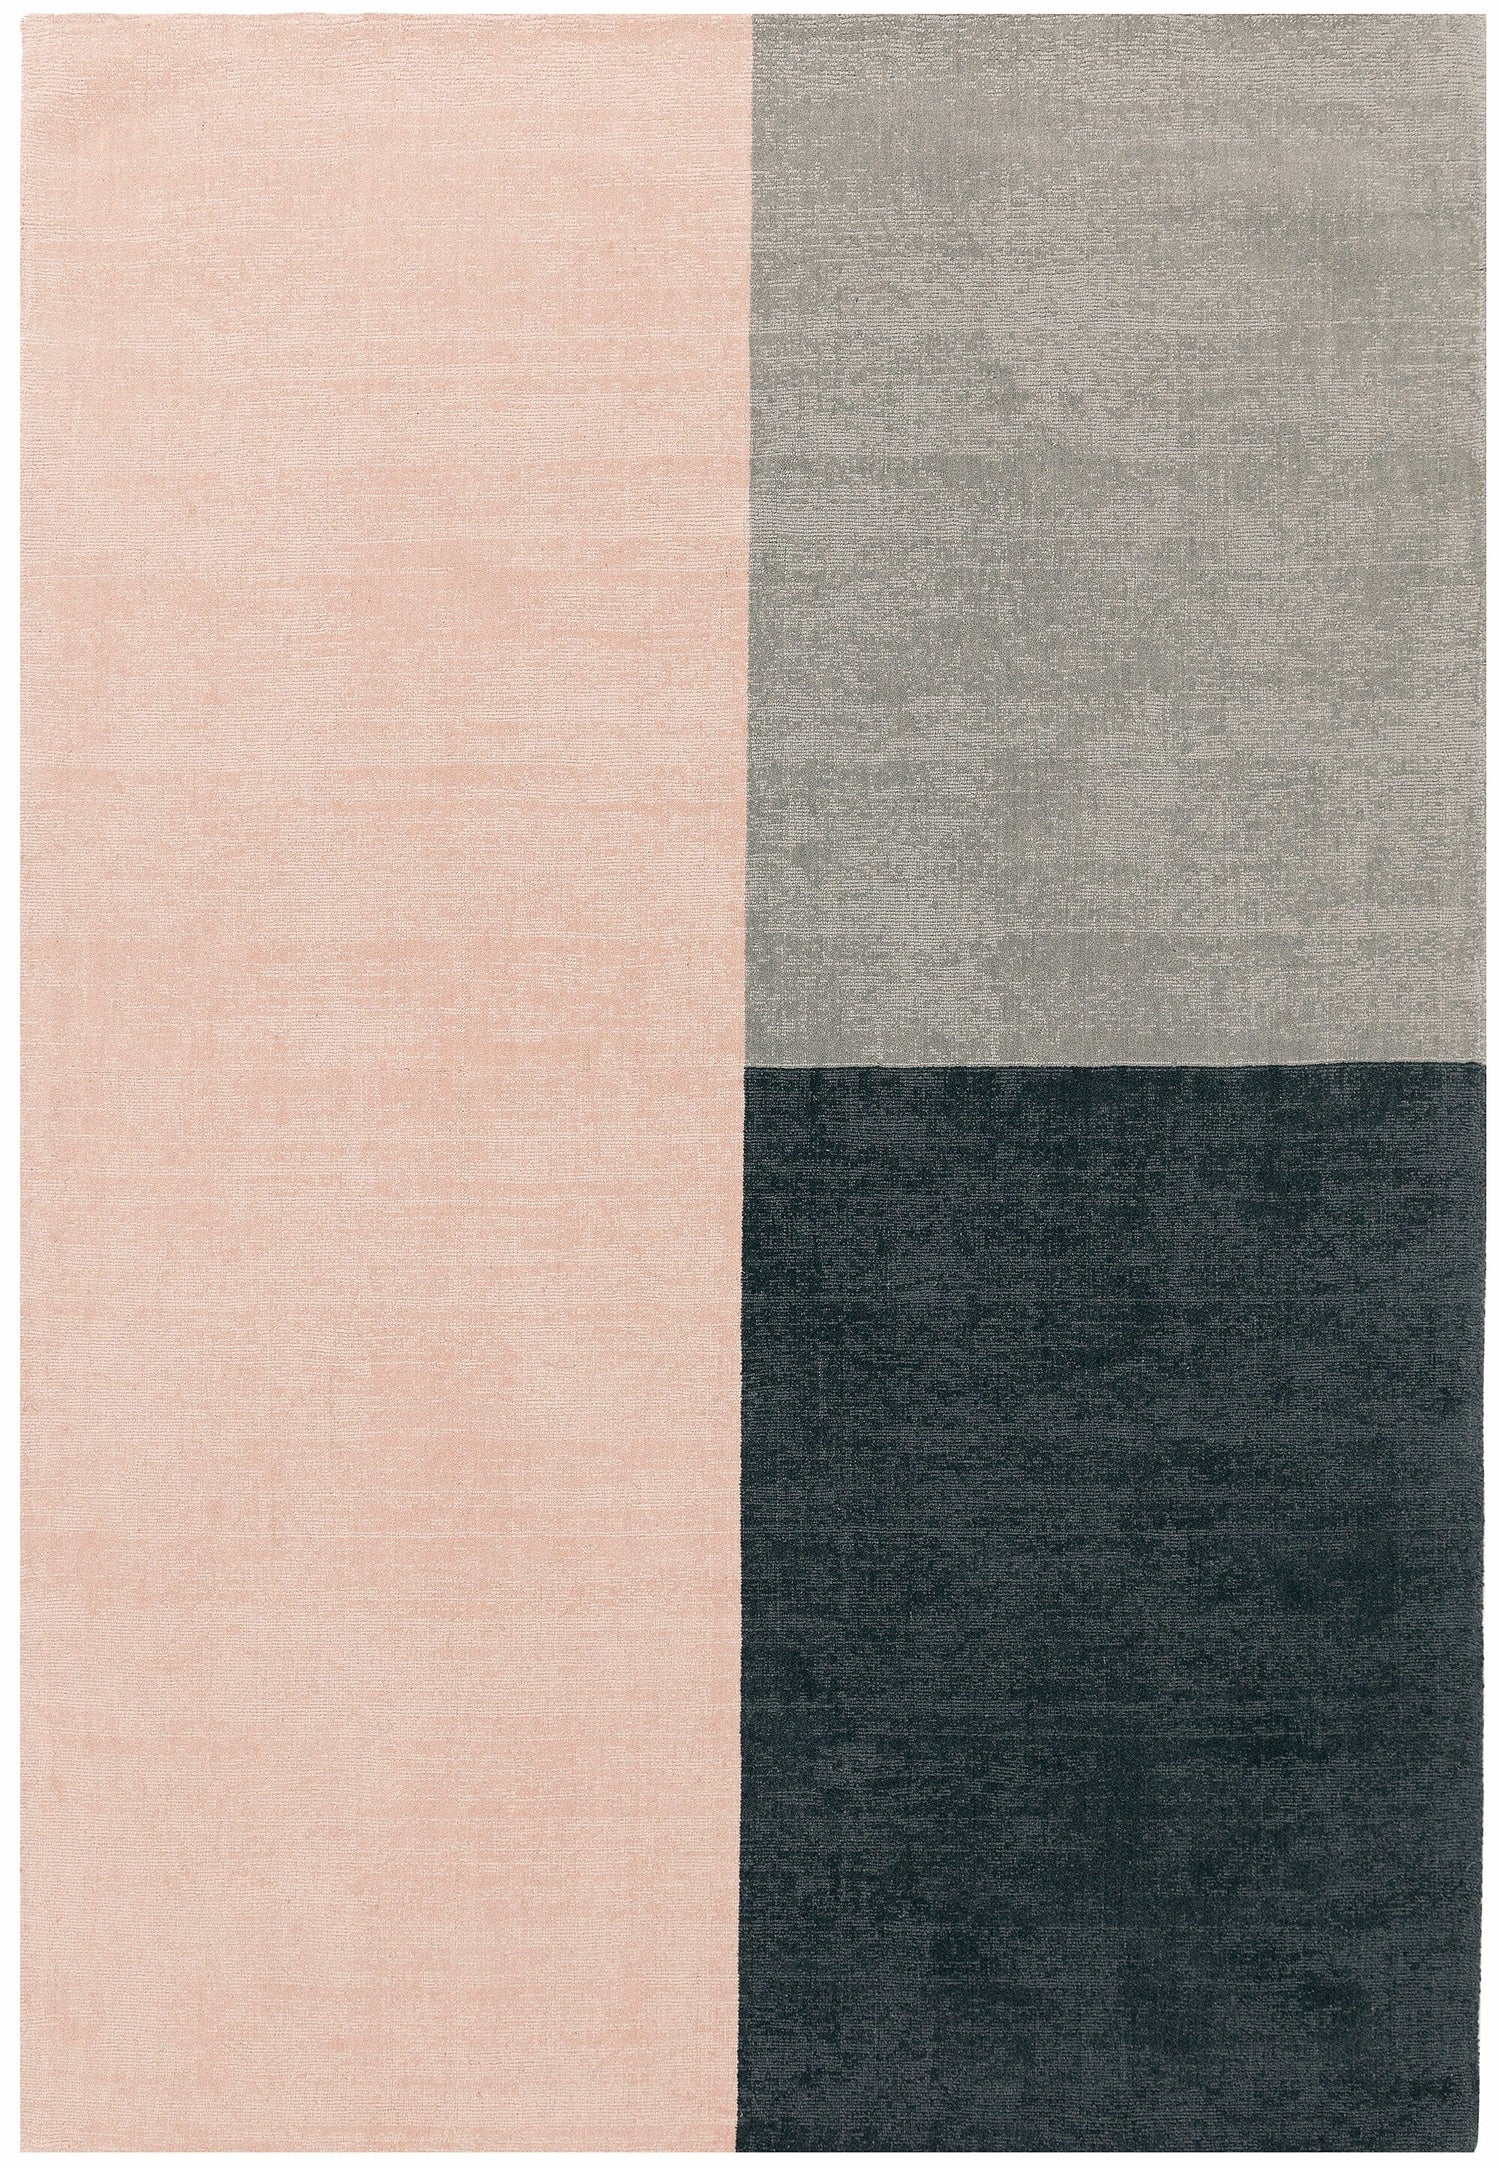  Asiatic Carpets-Asiatic Carpets Blox Hand Woven Rug Pink - 200 x 300cm-Multicoloured 405 